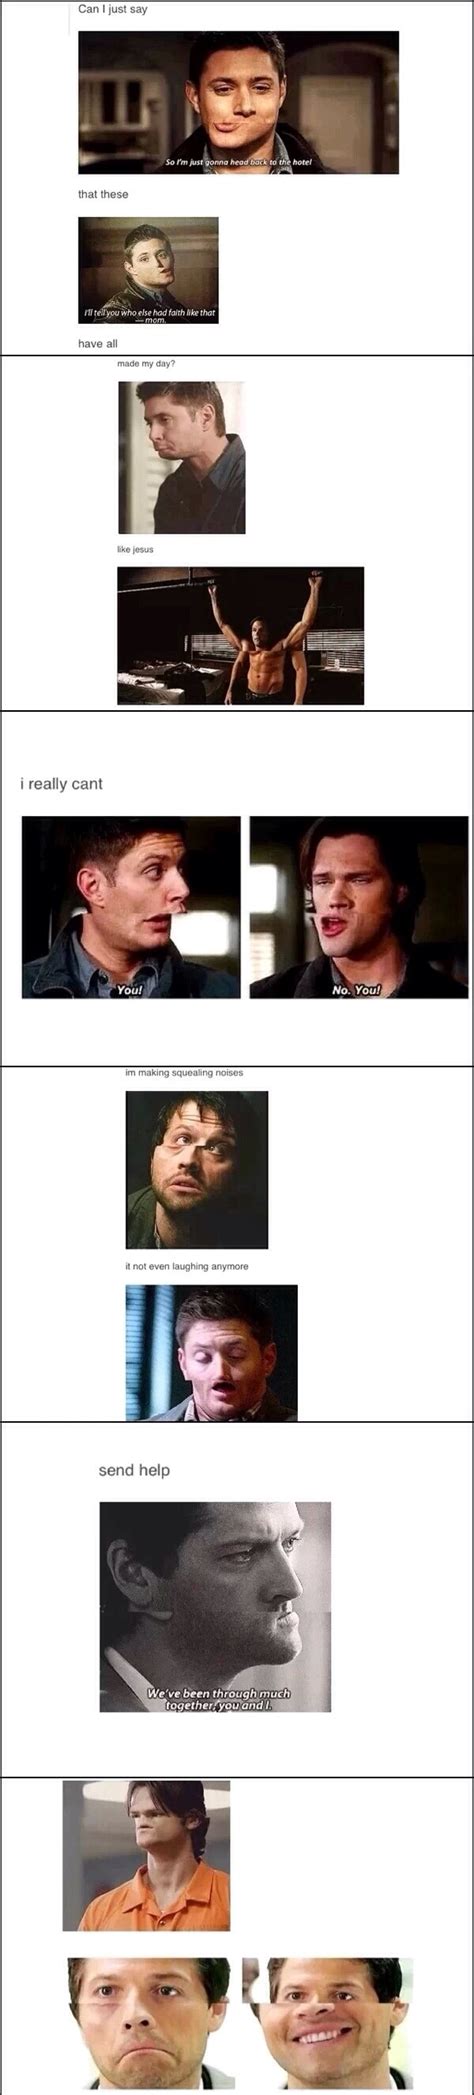 I Can T Stop Laughing The Last One Misha It S Precious Supernatural Cast